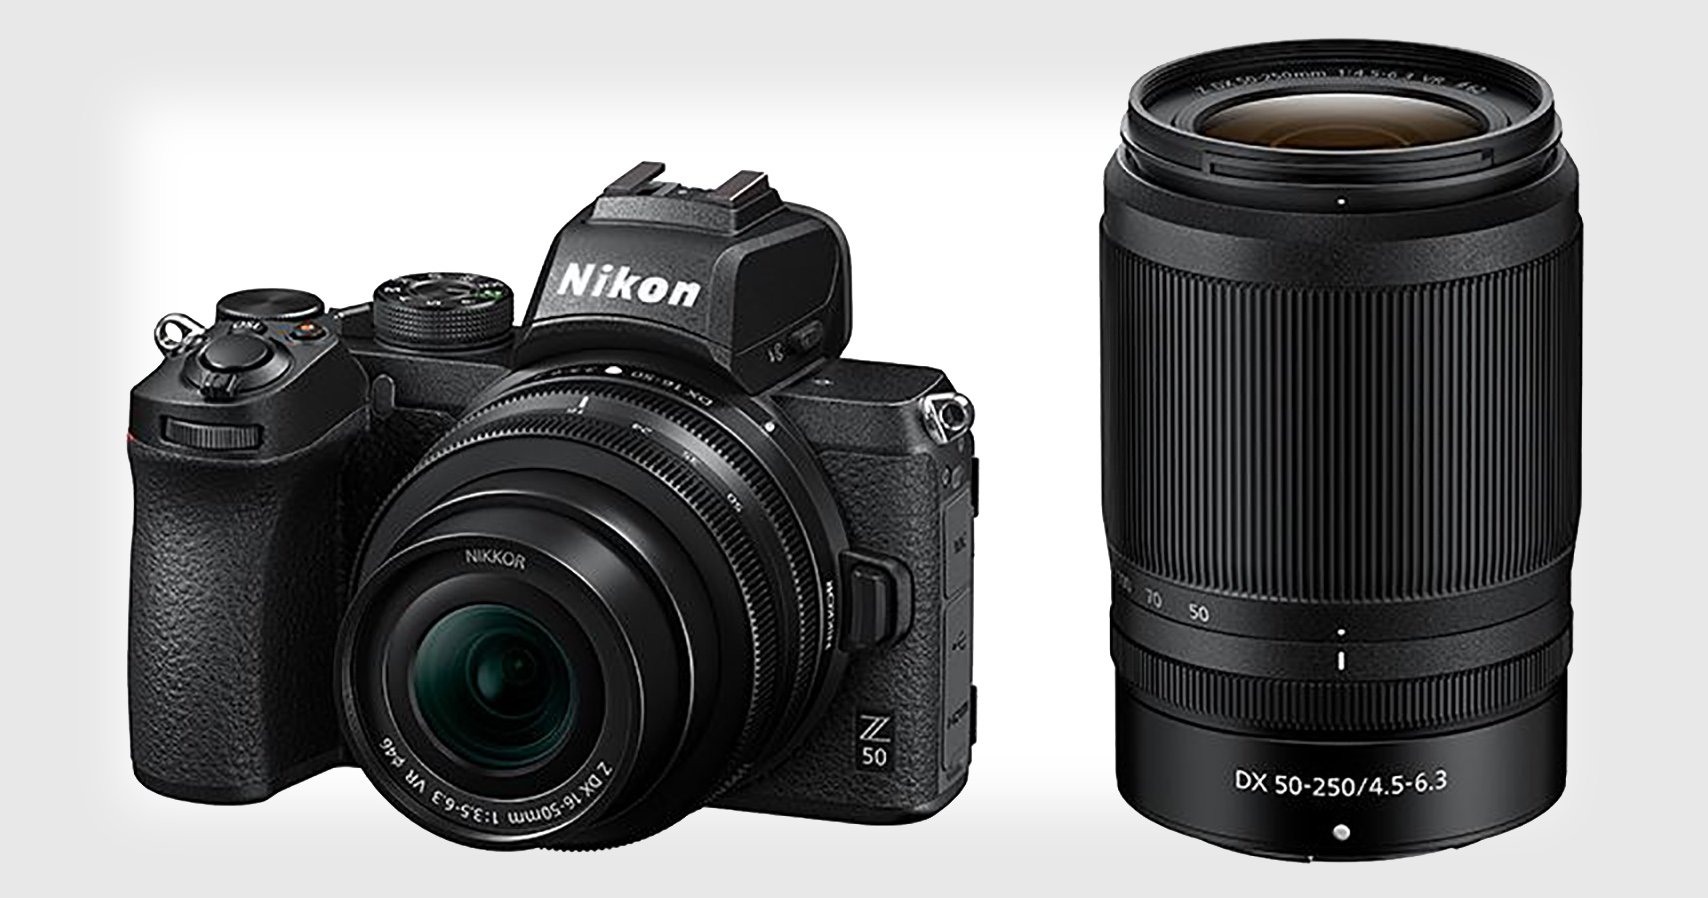 Nikon Z50 Product Photos Leaked: This is Nikons First APS-C Mirrorless